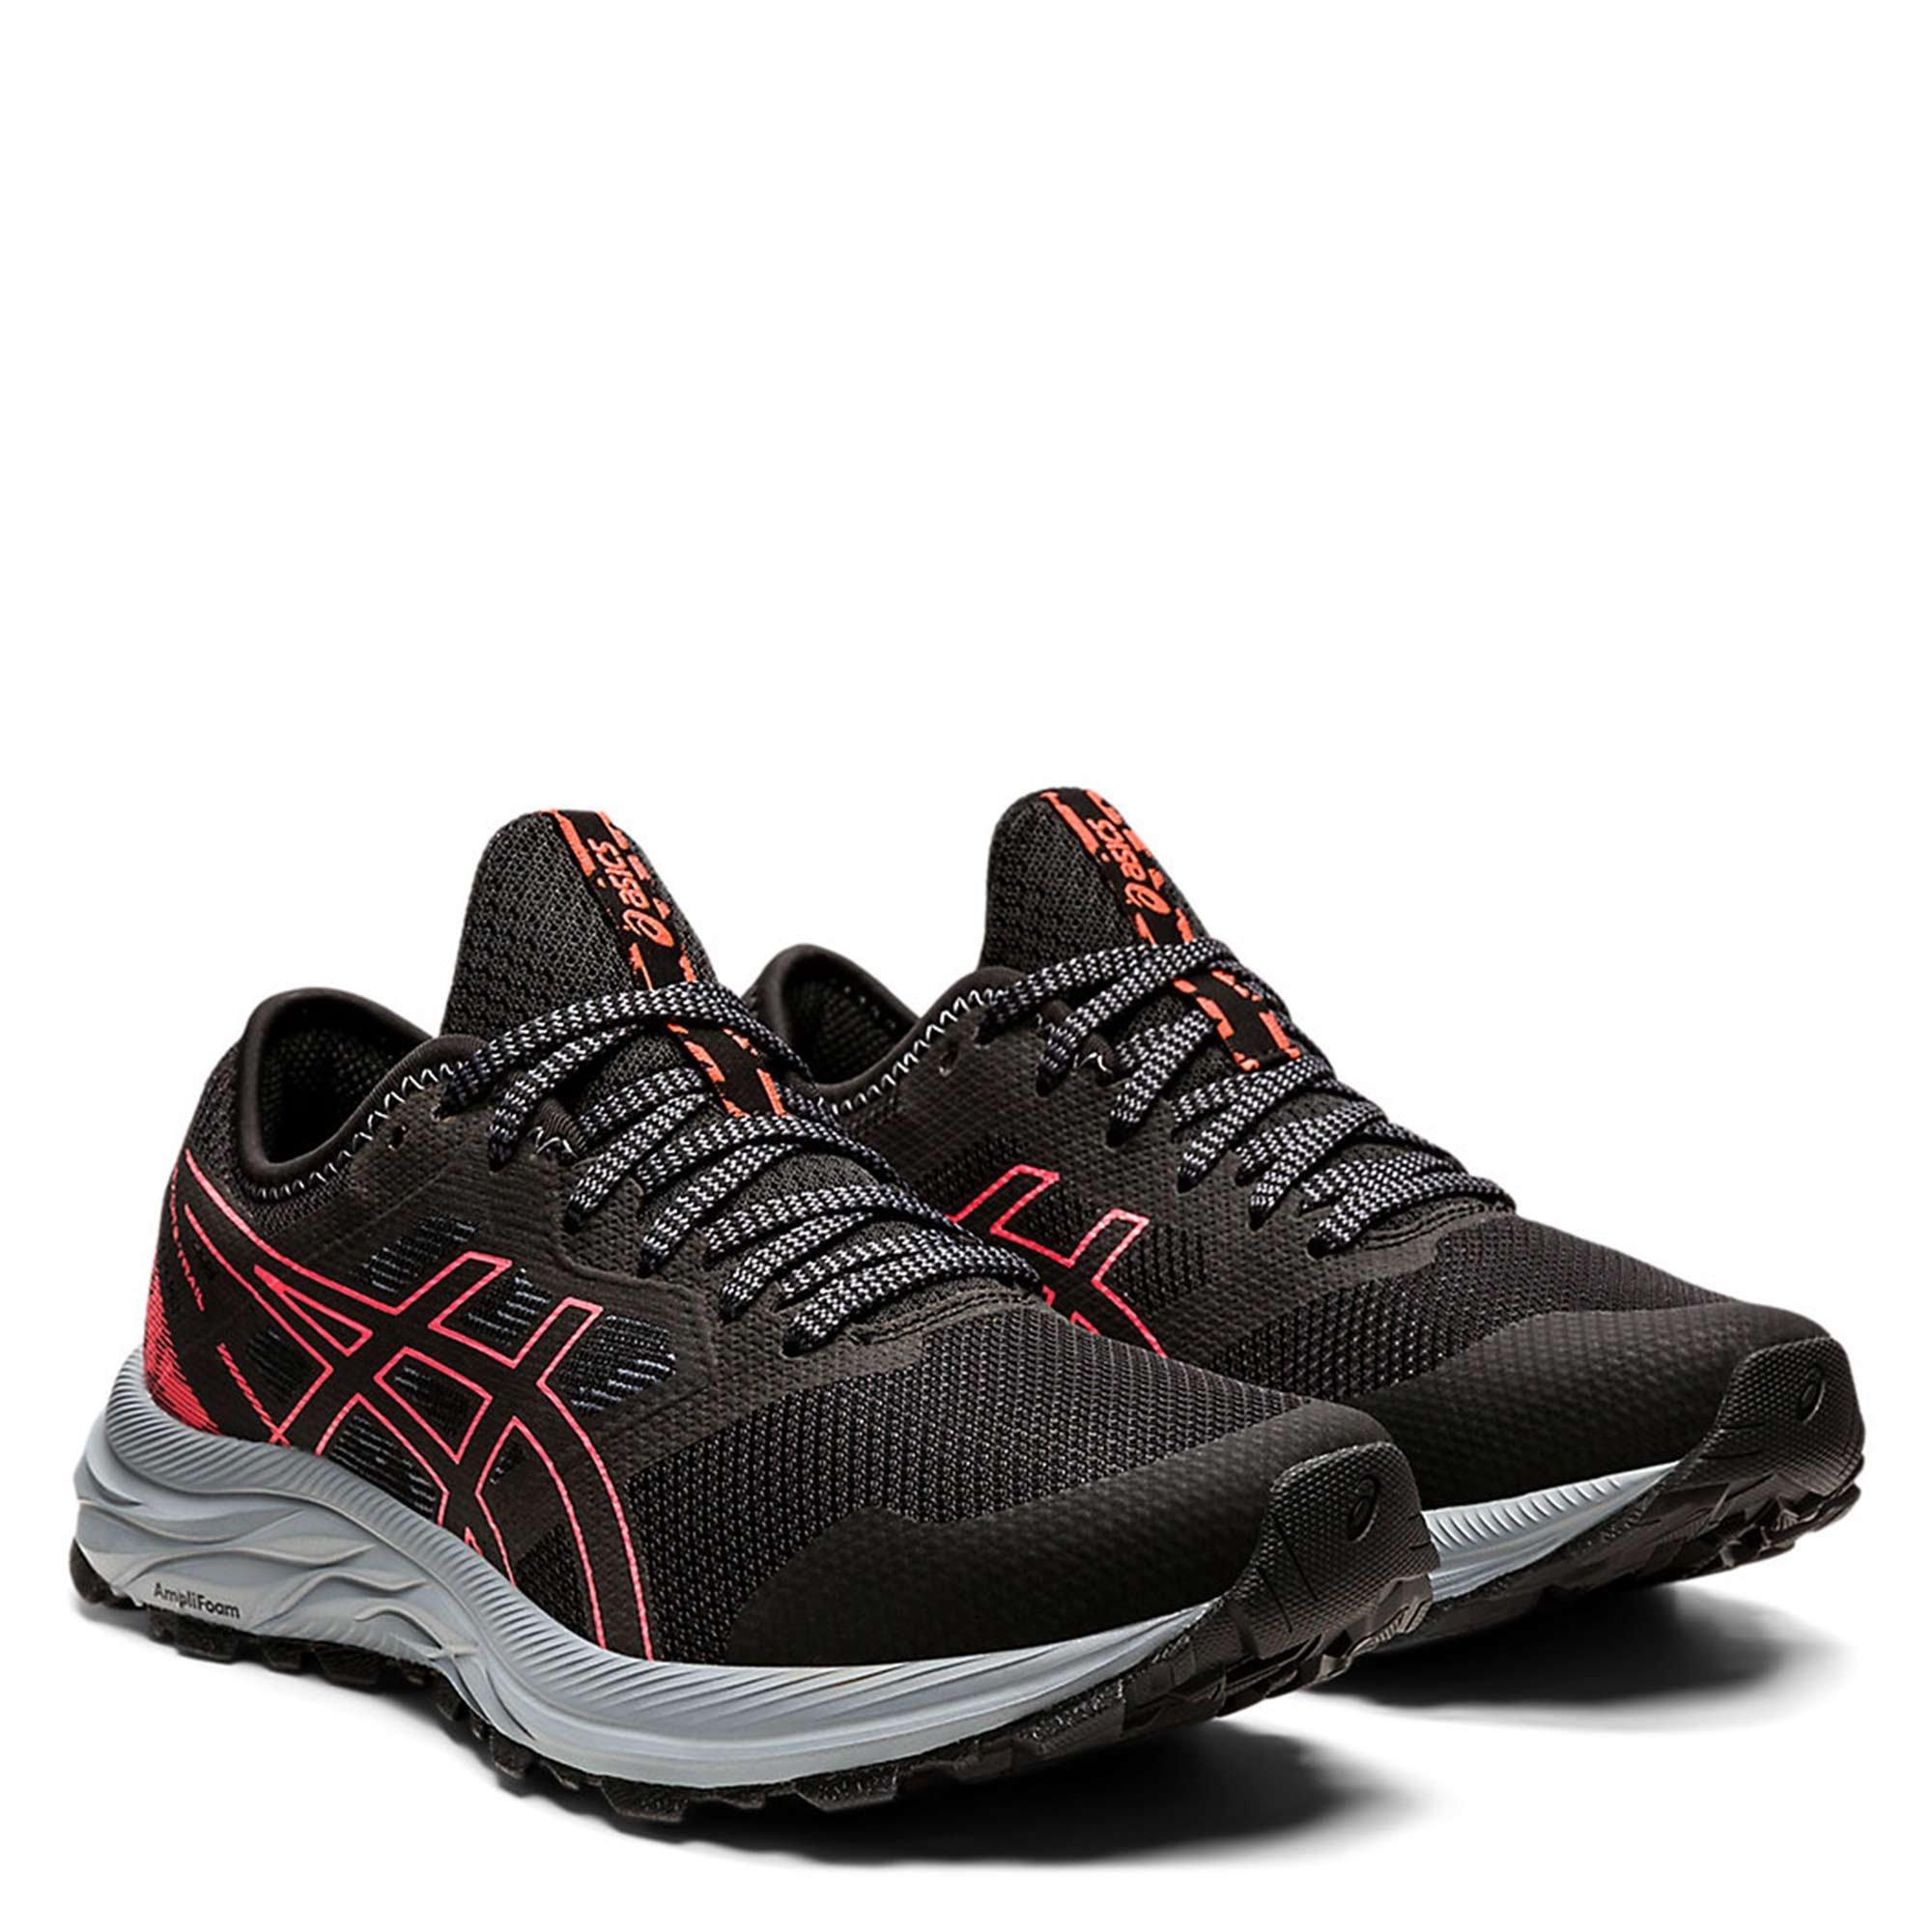 Asics, GEL Excite Womens Trail Running Shoes